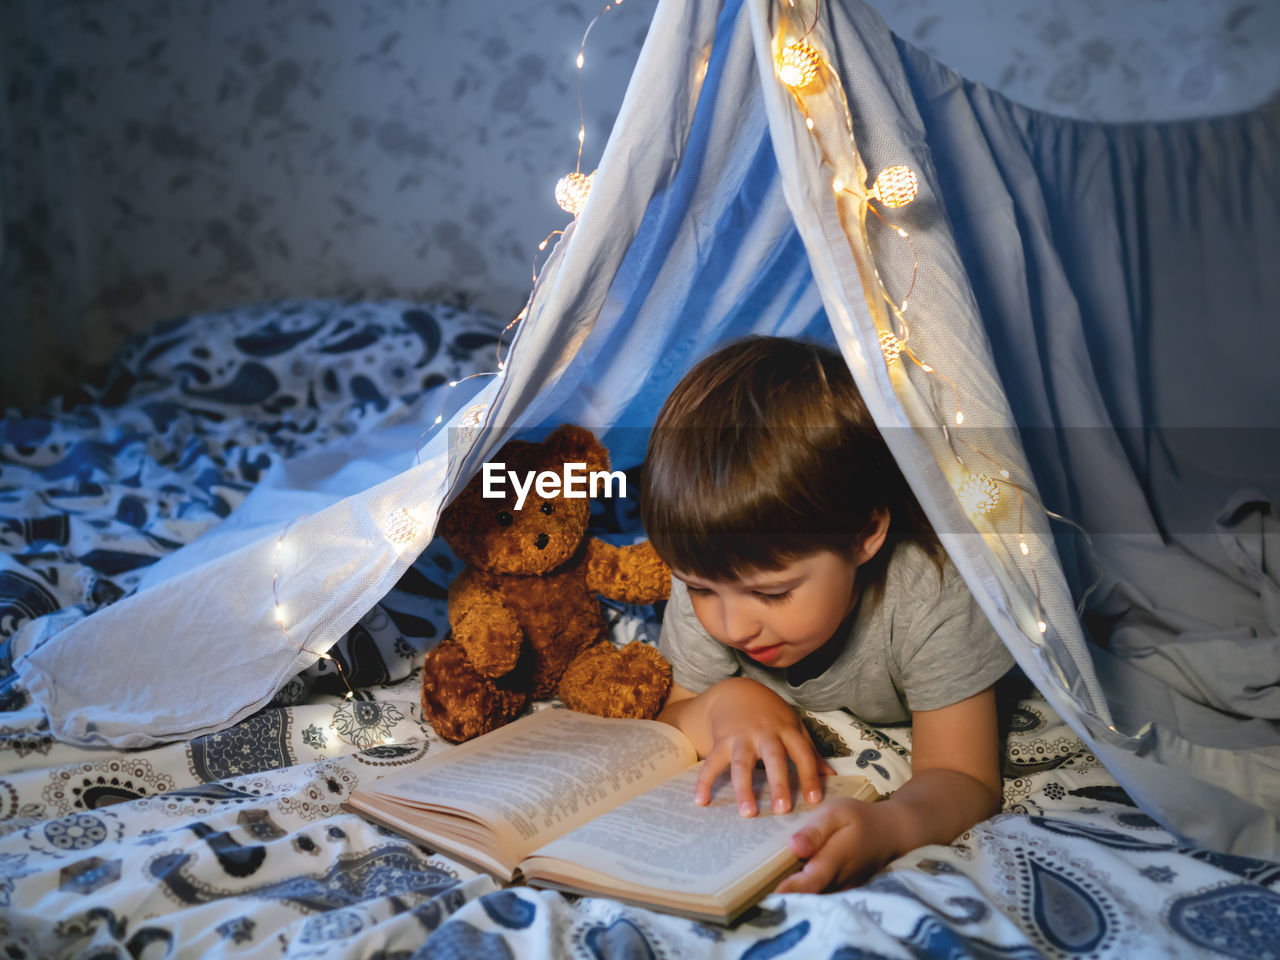 Little boy reads book. toddler plays in tent made of linen sheet on bed. 